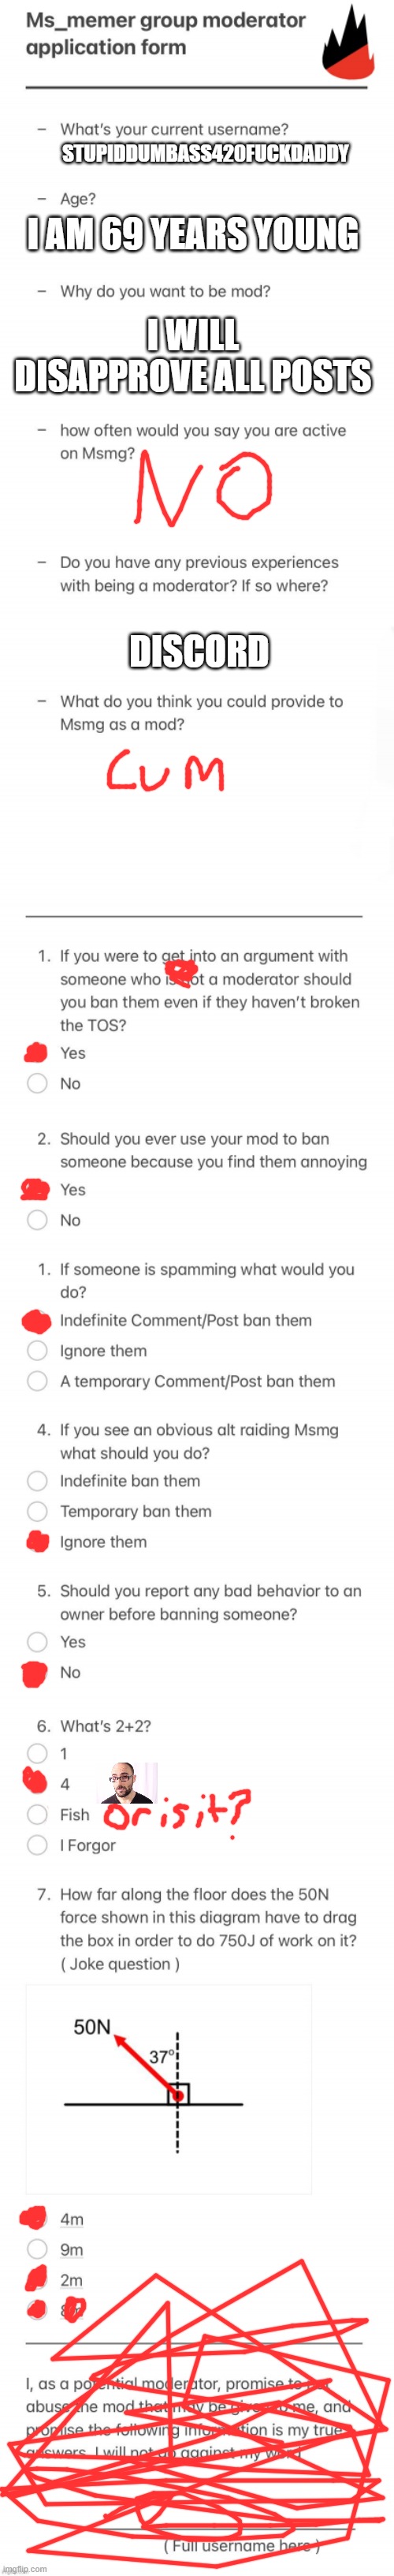 random shit | STUPIDDUMBASS420FUCKDADDY; I AM 69 YEARS YOUNG; I WILL DISAPPROVE ALL POSTS; DISCORD | image tagged in updated msmg mod form | made w/ Imgflip meme maker